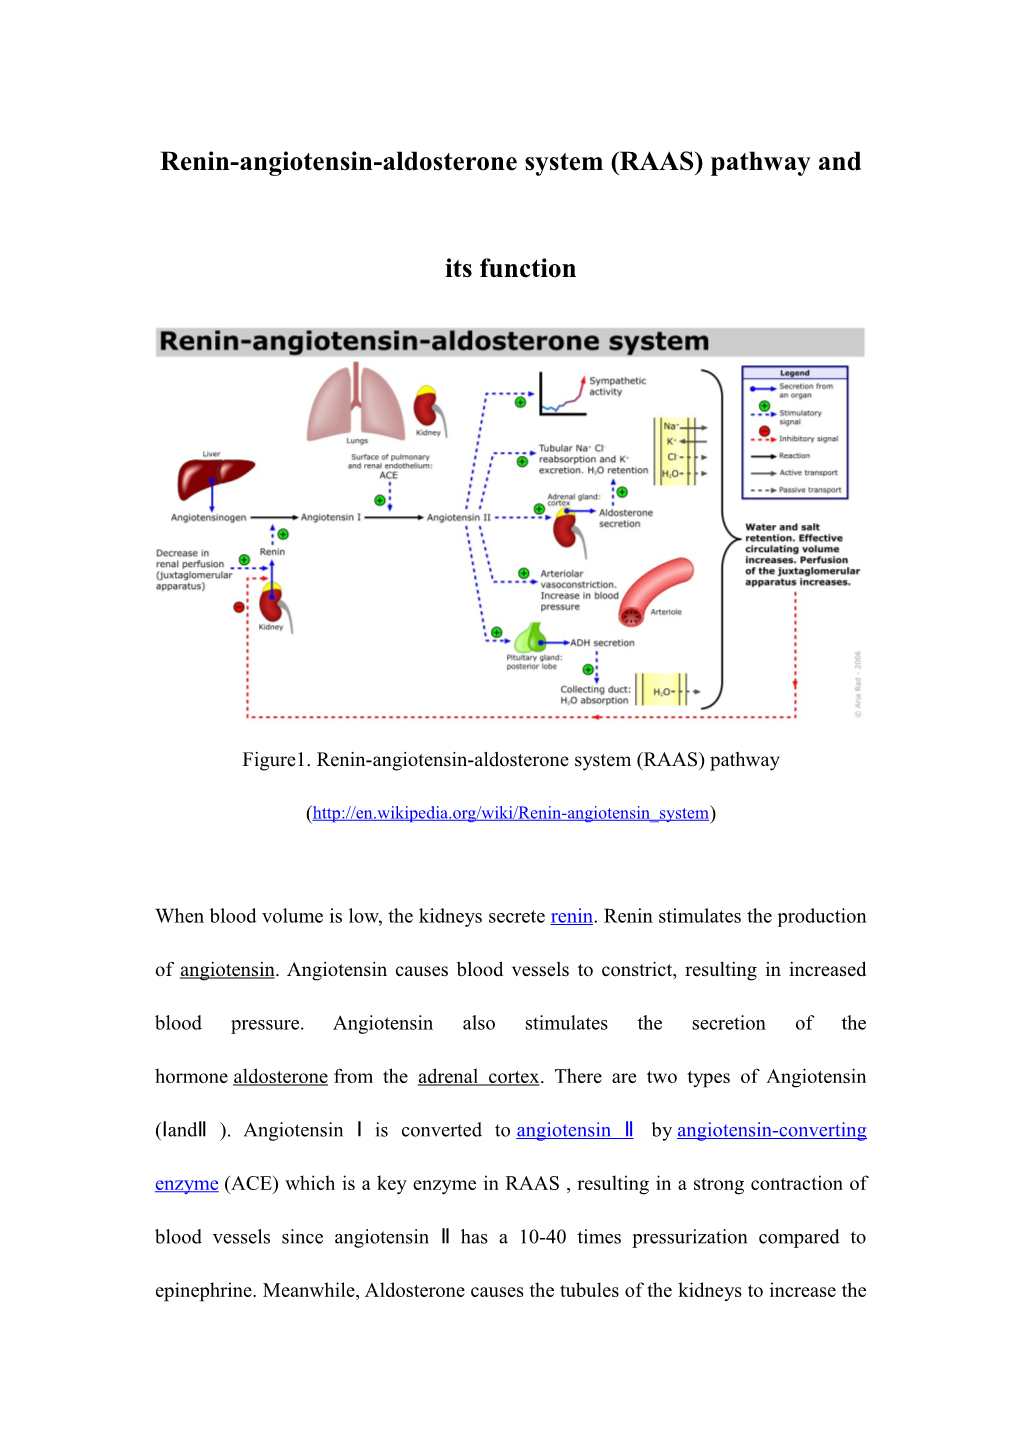 Renin-Angiotensin-Aldosterone System (RAAS) Pathway and Its Function